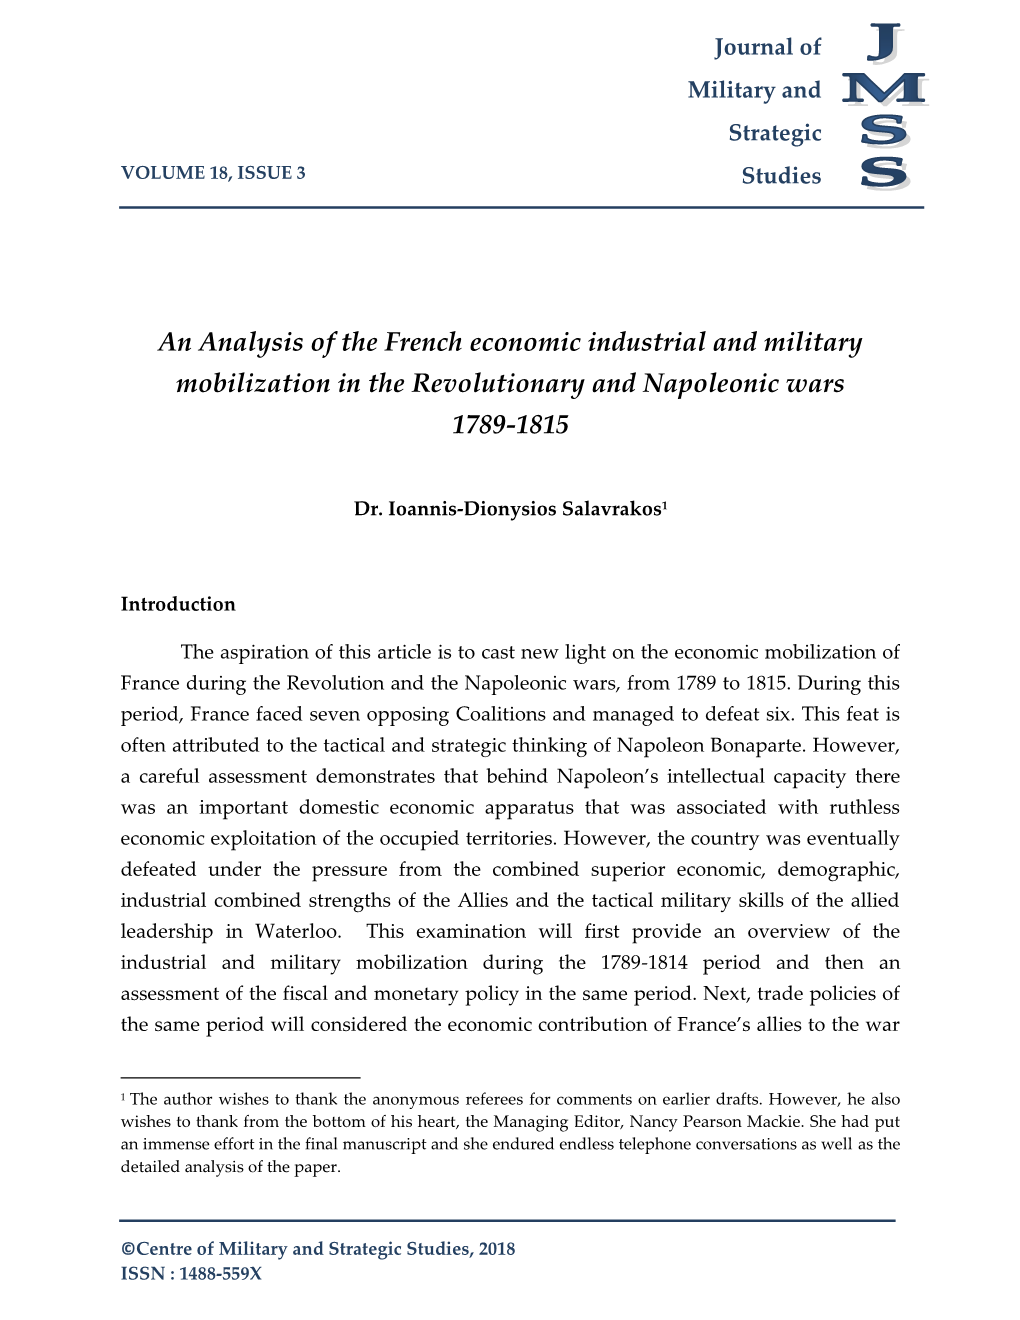 An Analysis of the French Economic Industrial and Military Mobilization in the Revolutionary and Napoleonic Wars 1789-1815